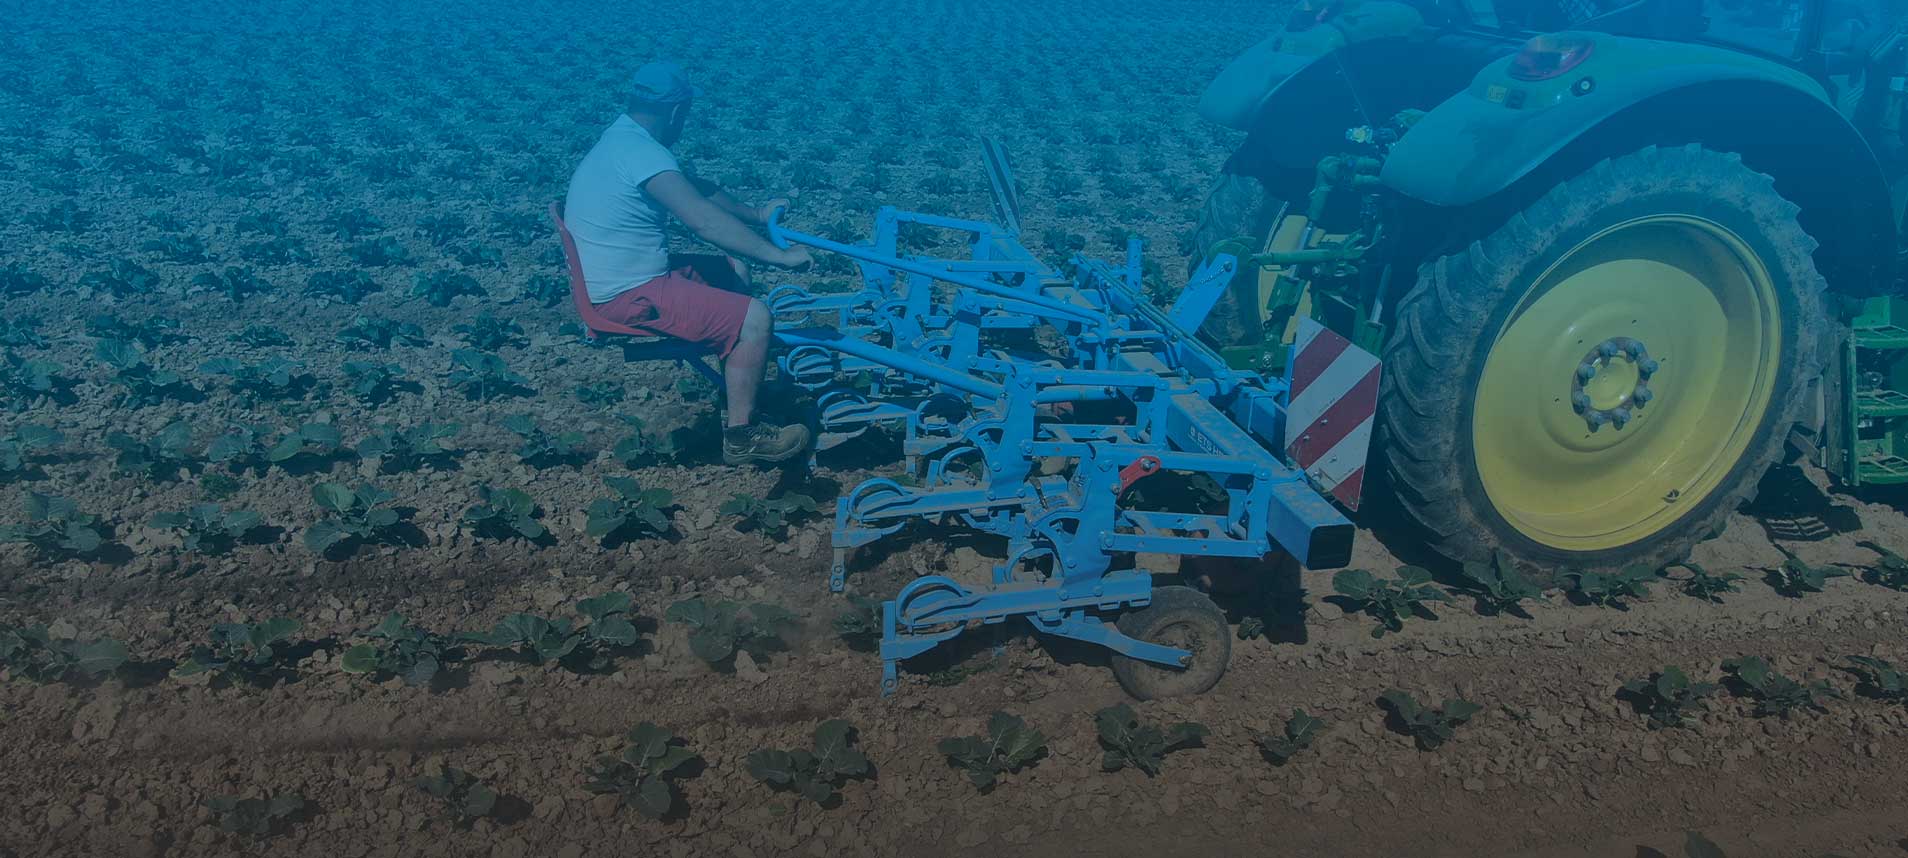 Photo of a vegetable cultivator